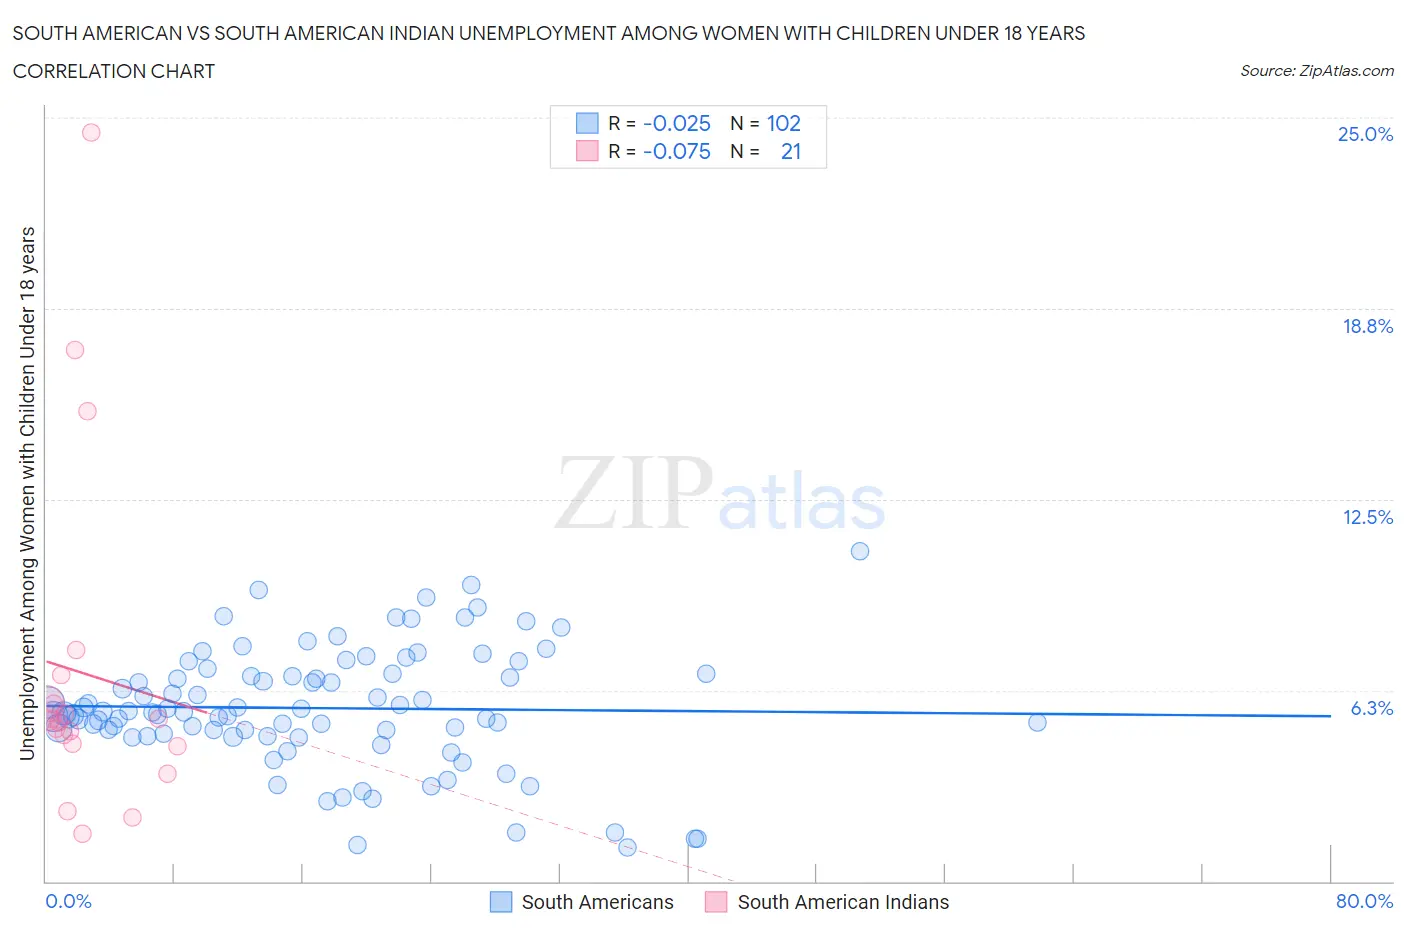 South American vs South American Indian Unemployment Among Women with Children Under 18 years